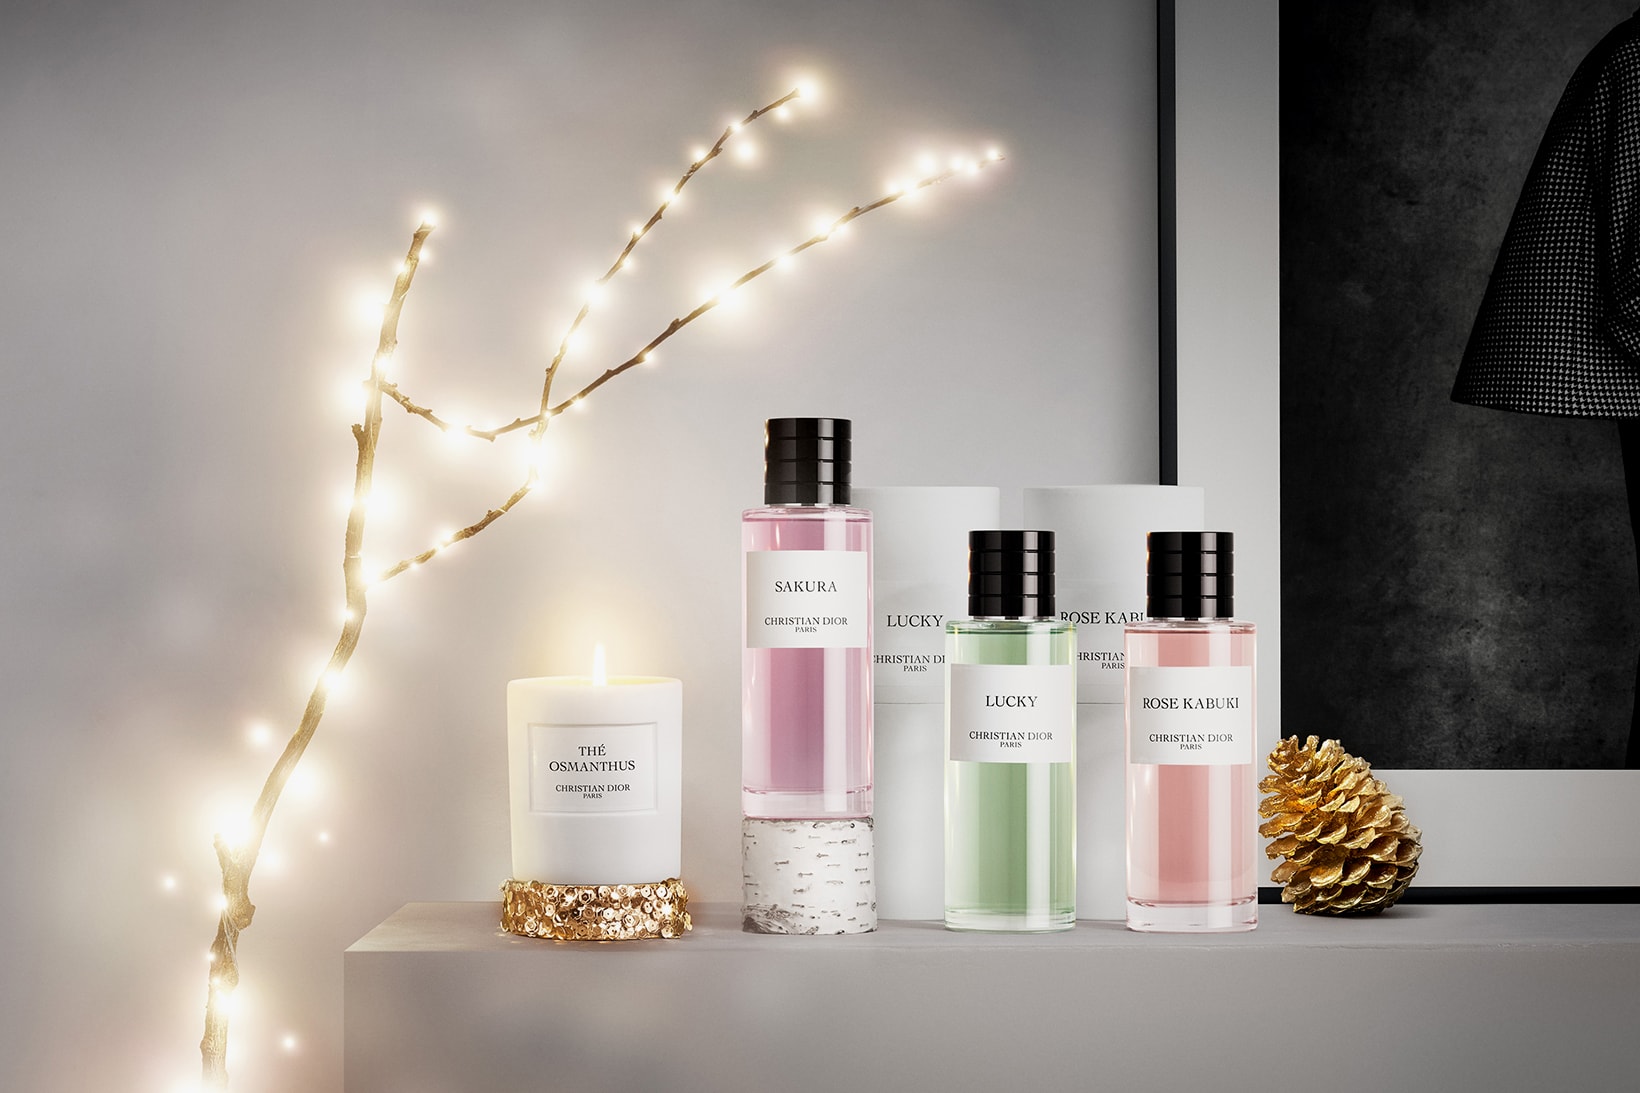 christian dior christmas scented candles homeware 